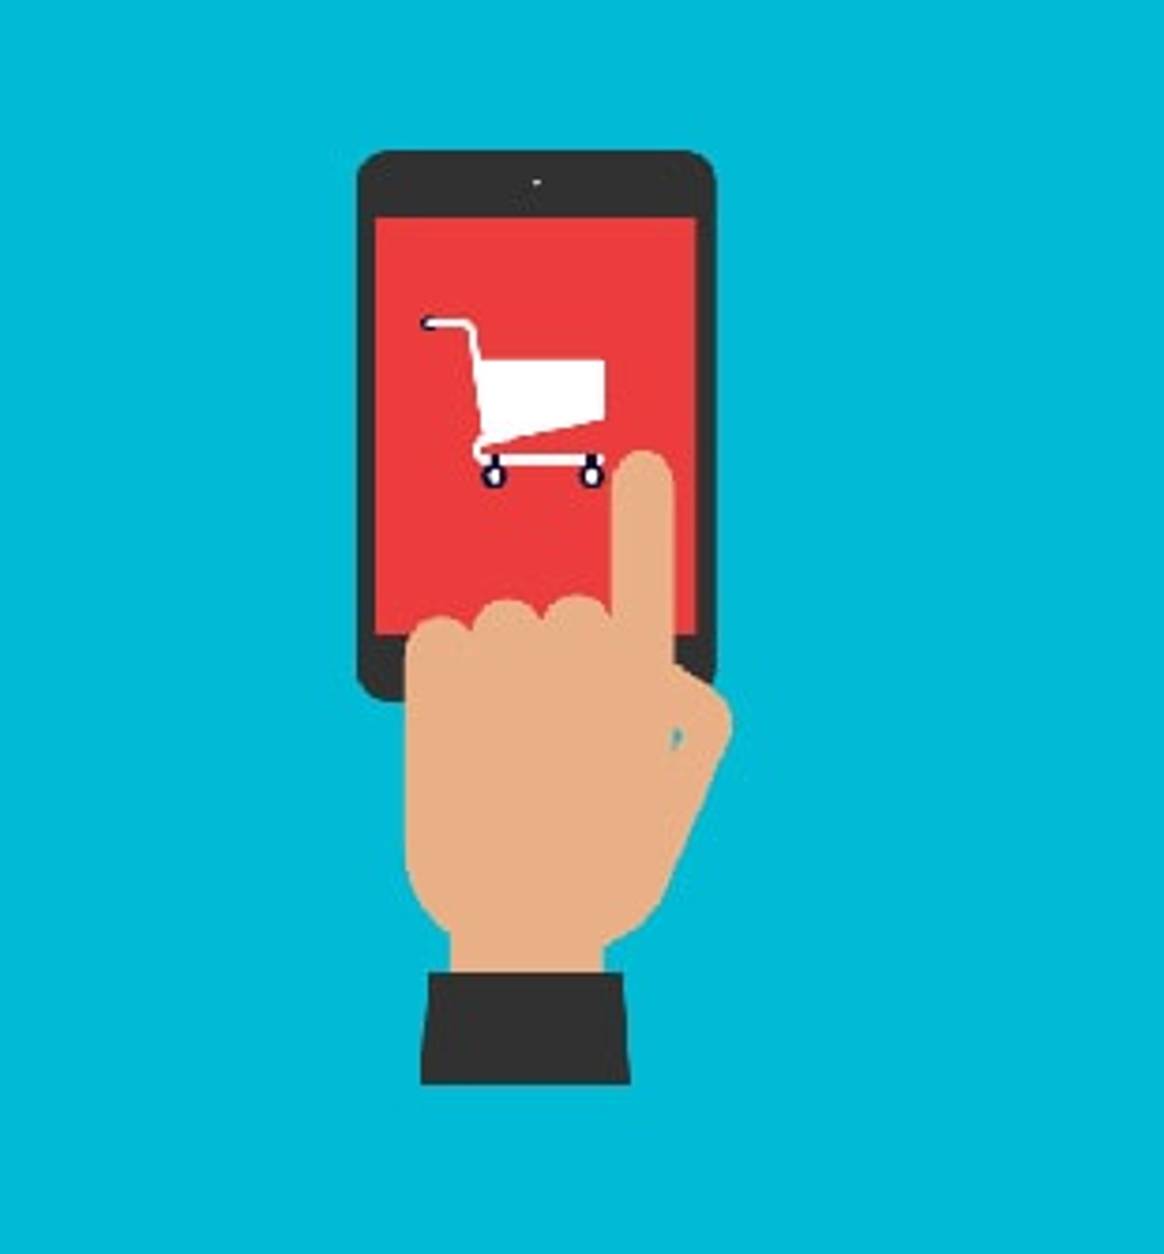 Google reveals purchasing habits with 2014 Consumer Barometer